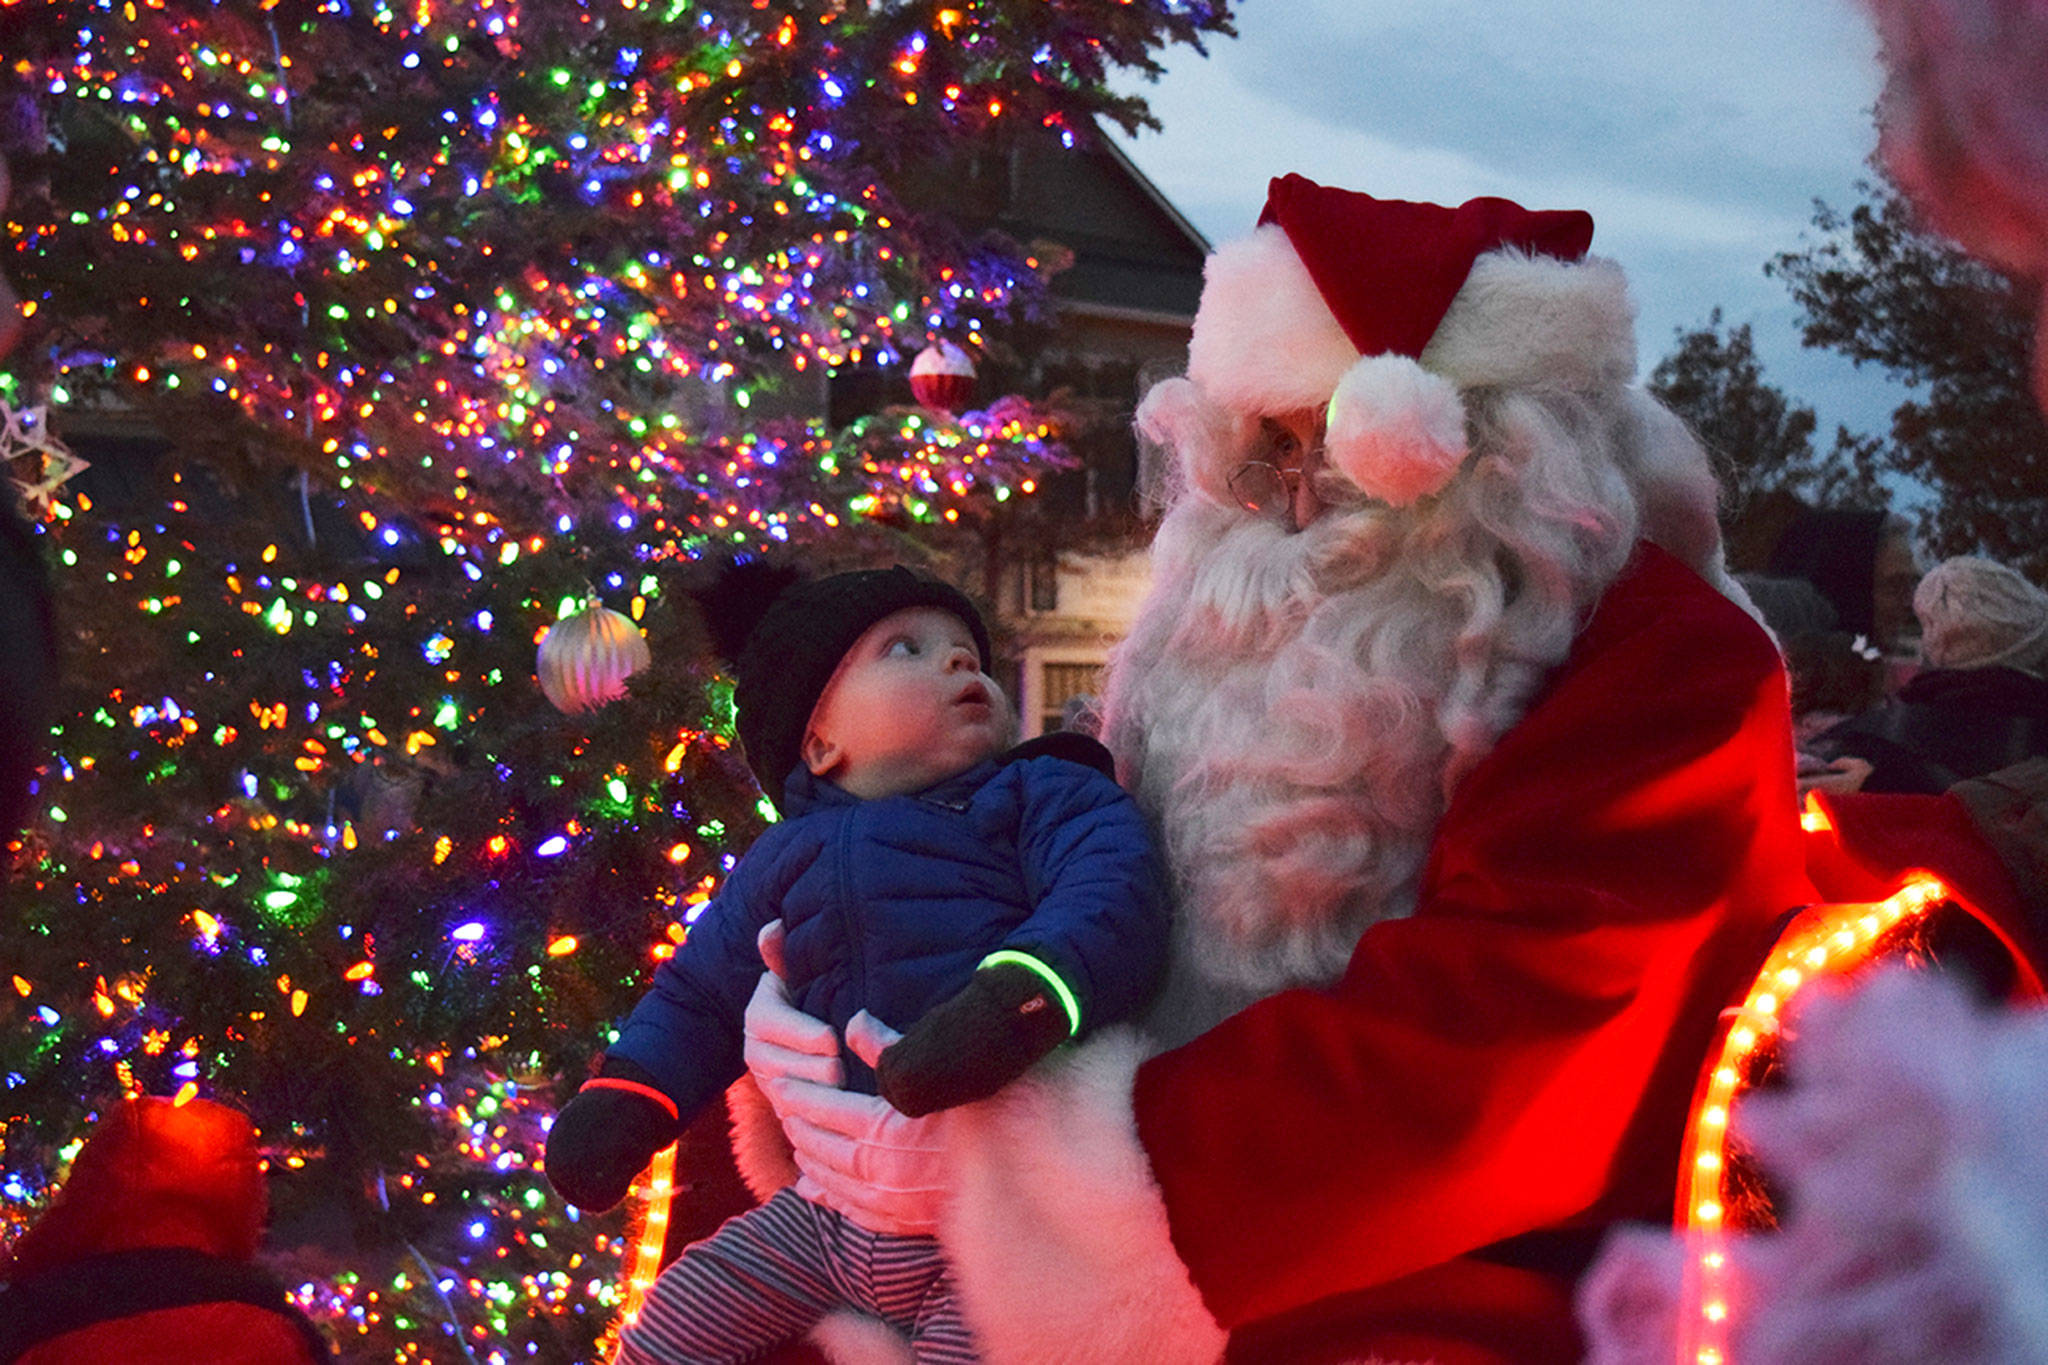 Magic moments like this between Dylan Krashan and Santa Claus in 2018 won’t happen this year at the downtown Sequim tree lighting event due to pandemic protocols coming into place. The tree lighting moves online to 5 p.m. on Thanksgiving at the Sequim-Dungeness Valley Chamber of Commerce’s website and social media pages. Sequim Gazette file photo by Erin Hawkins